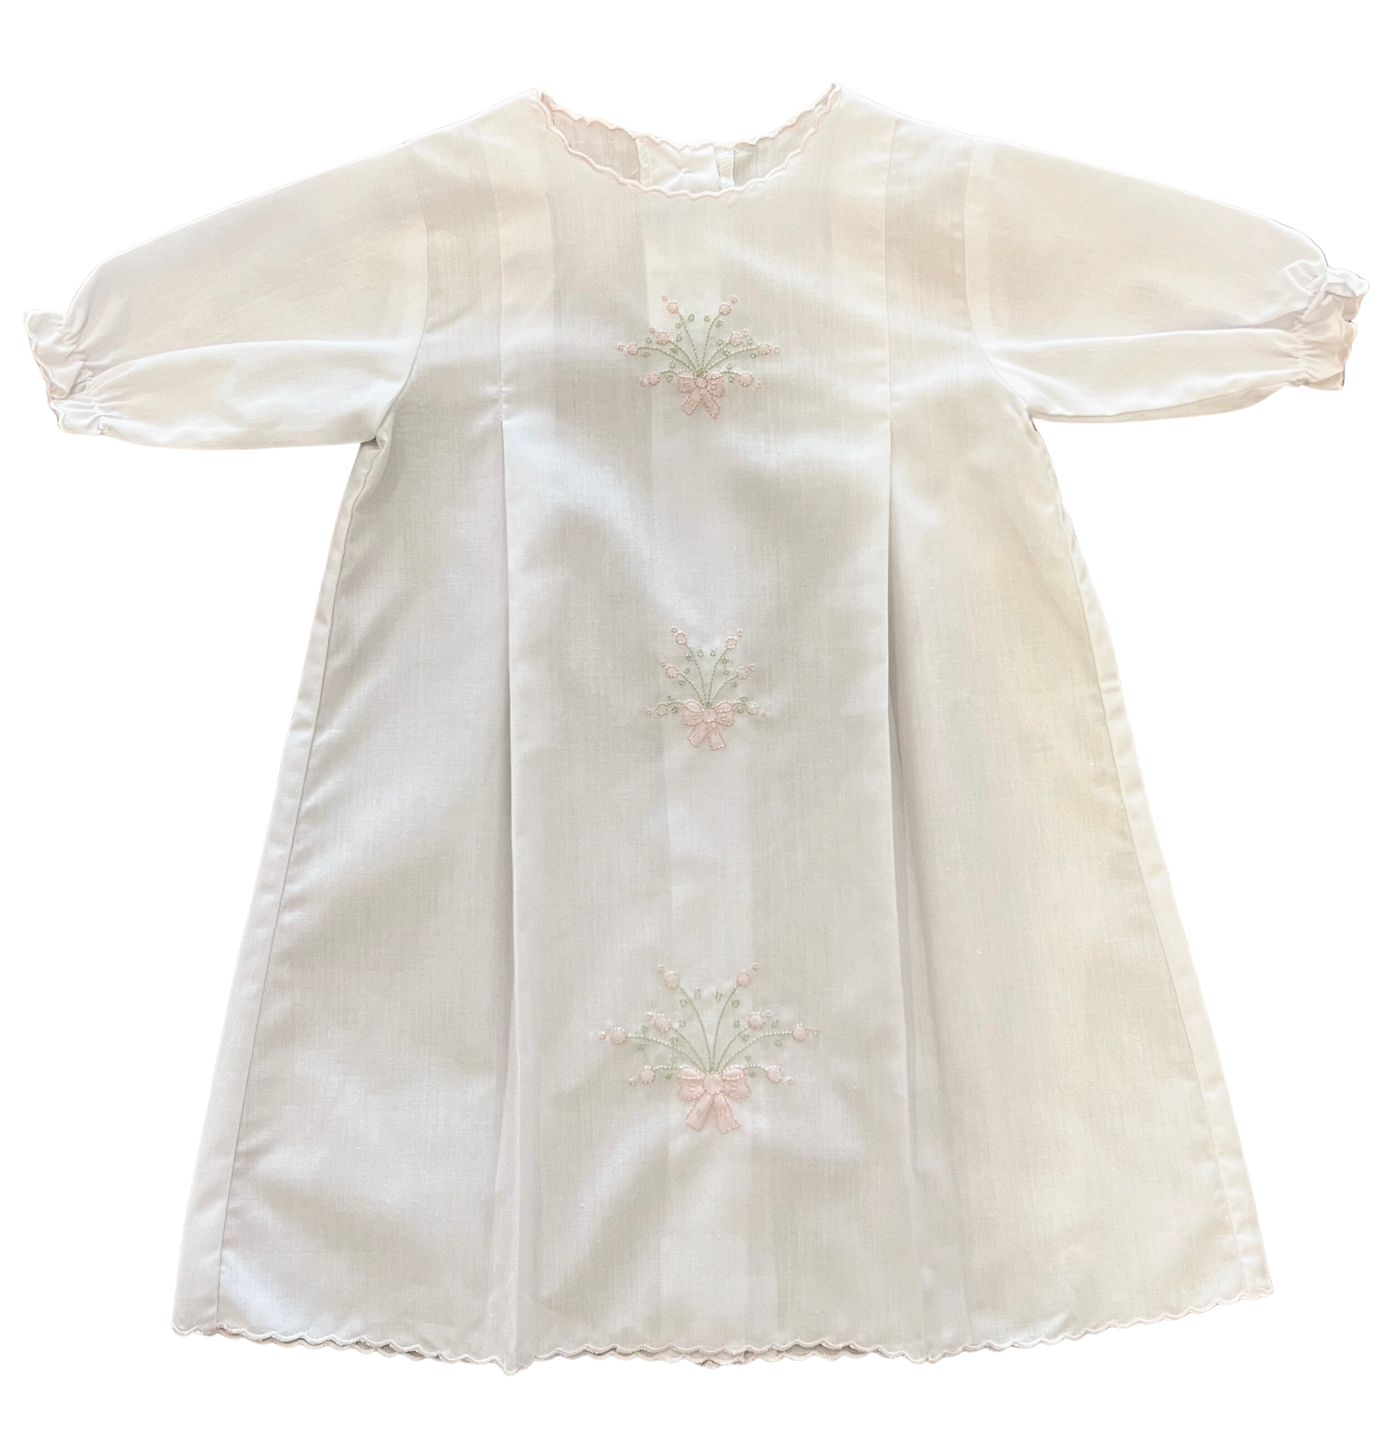 Long Sleeve Daygown w/ Bow Embroidery - White/Pink